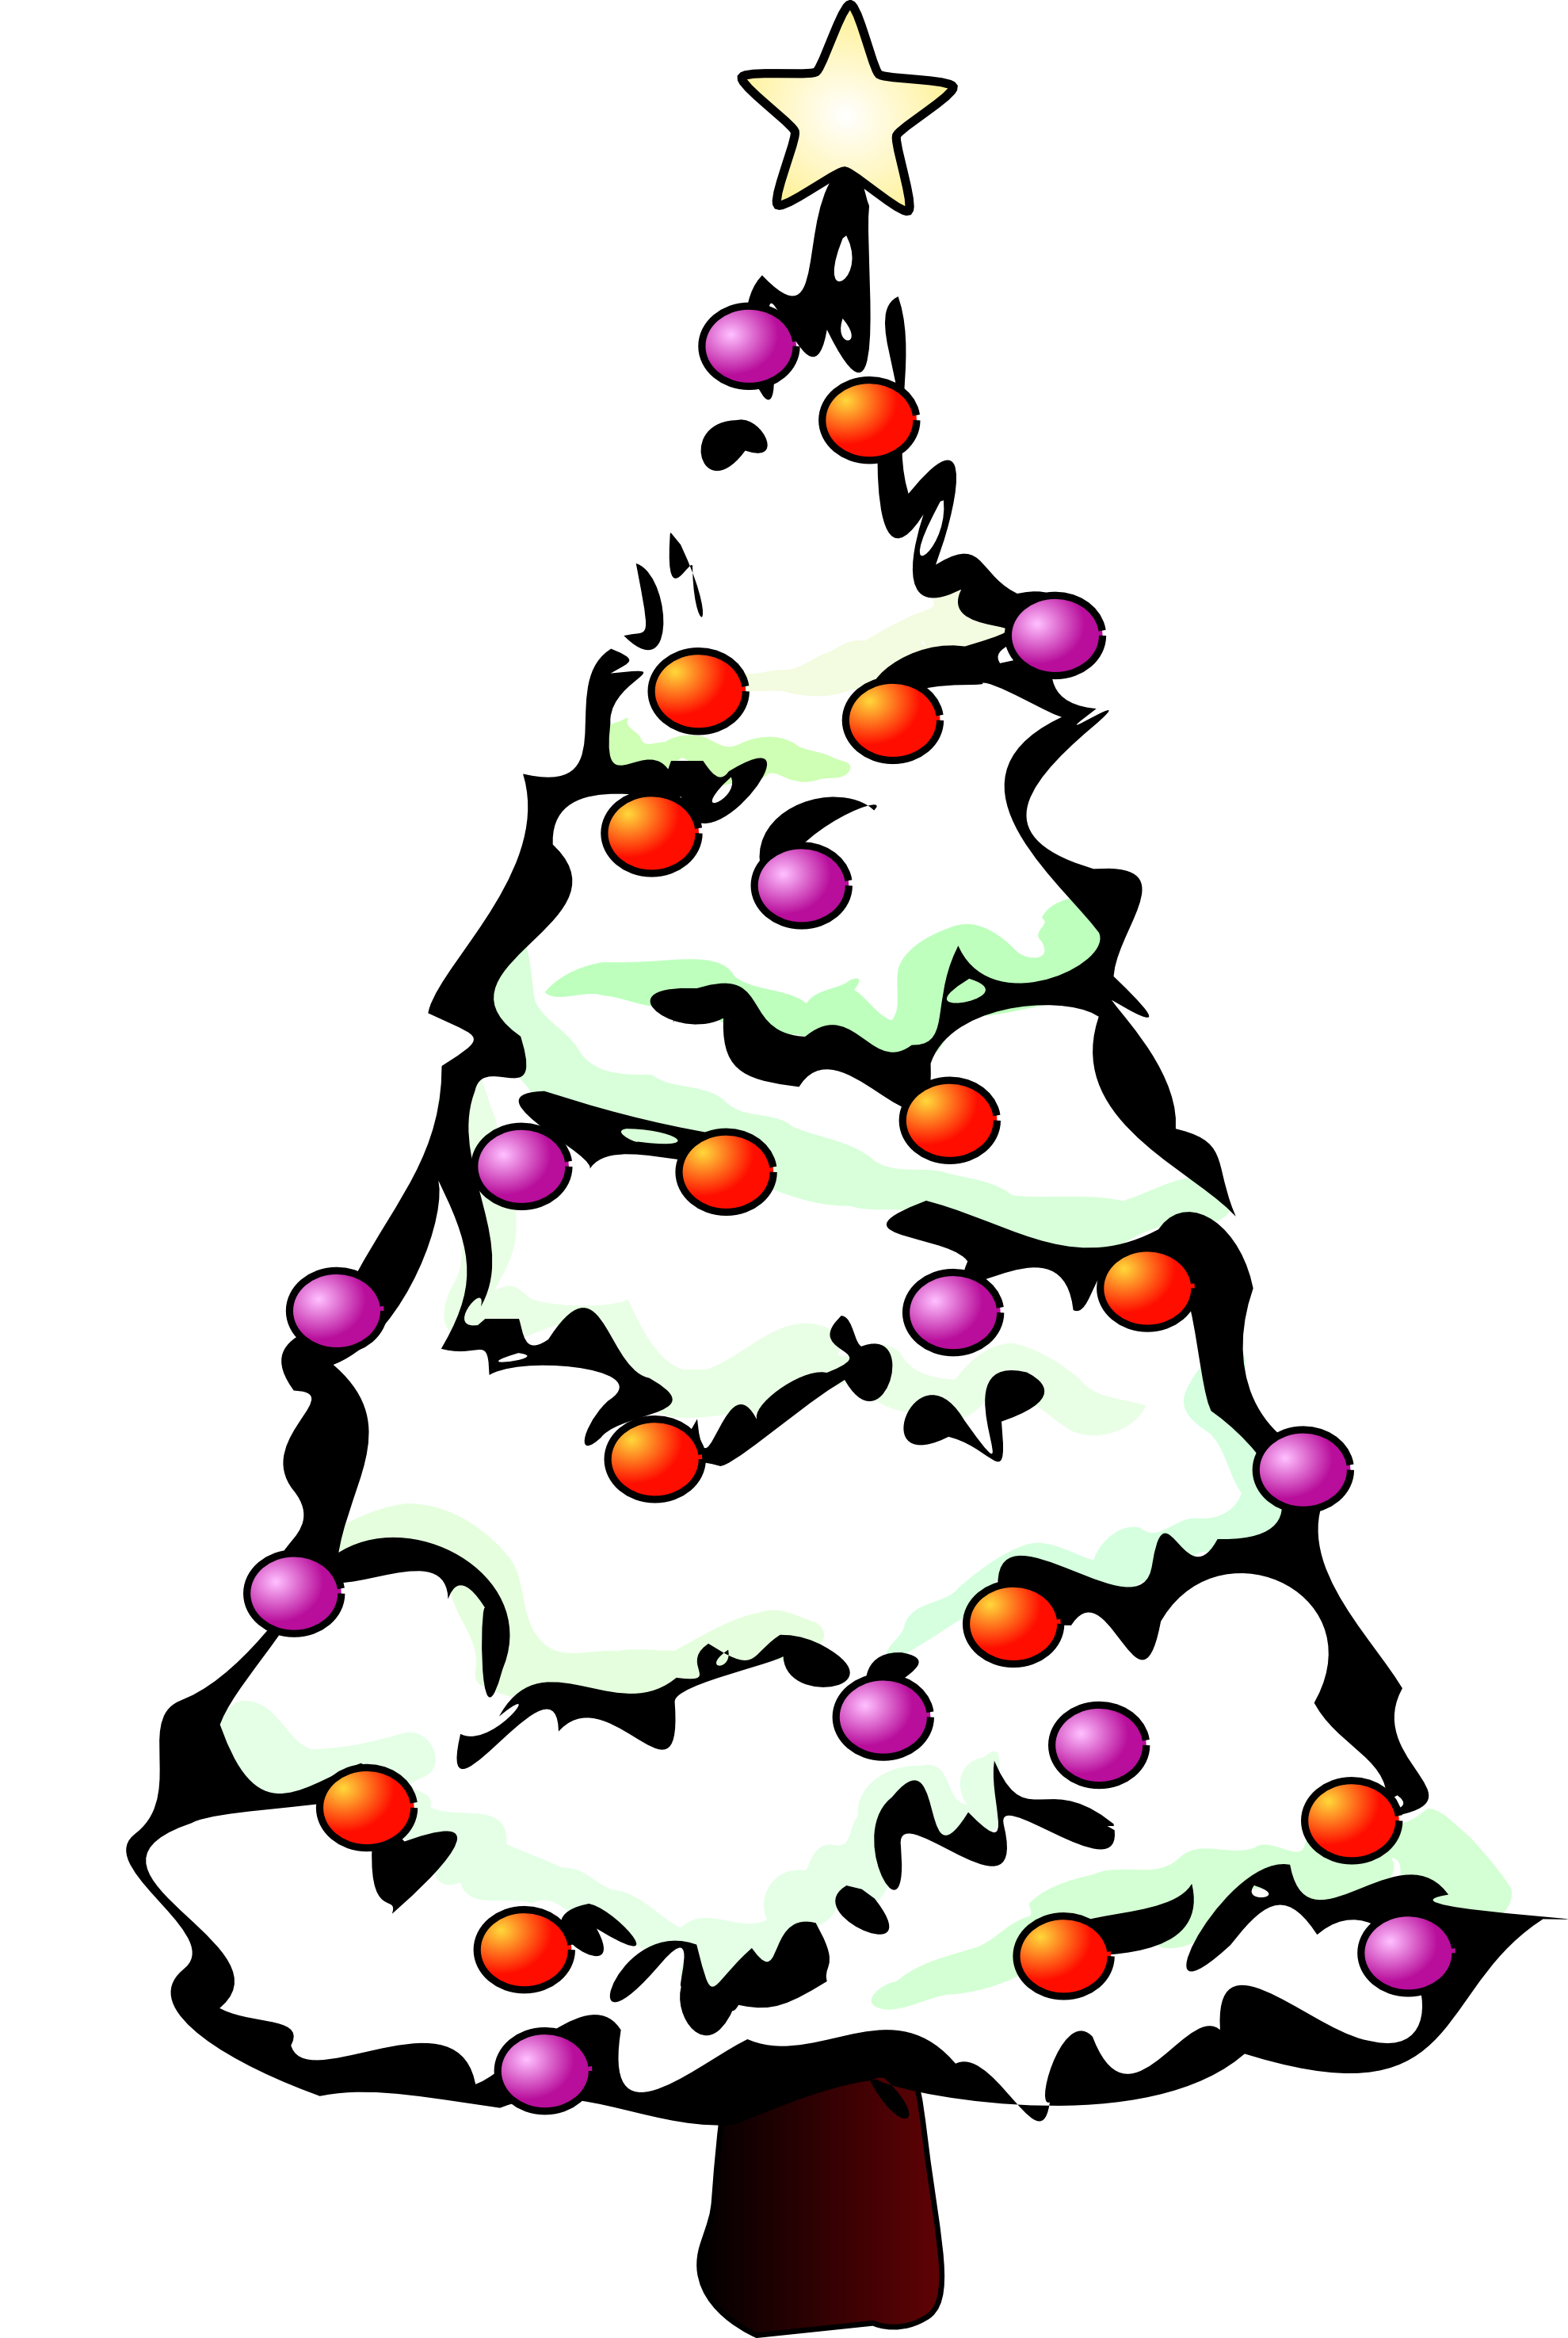 Free Christmas Tree With Presents Clipart, Download Free Christmas Tree